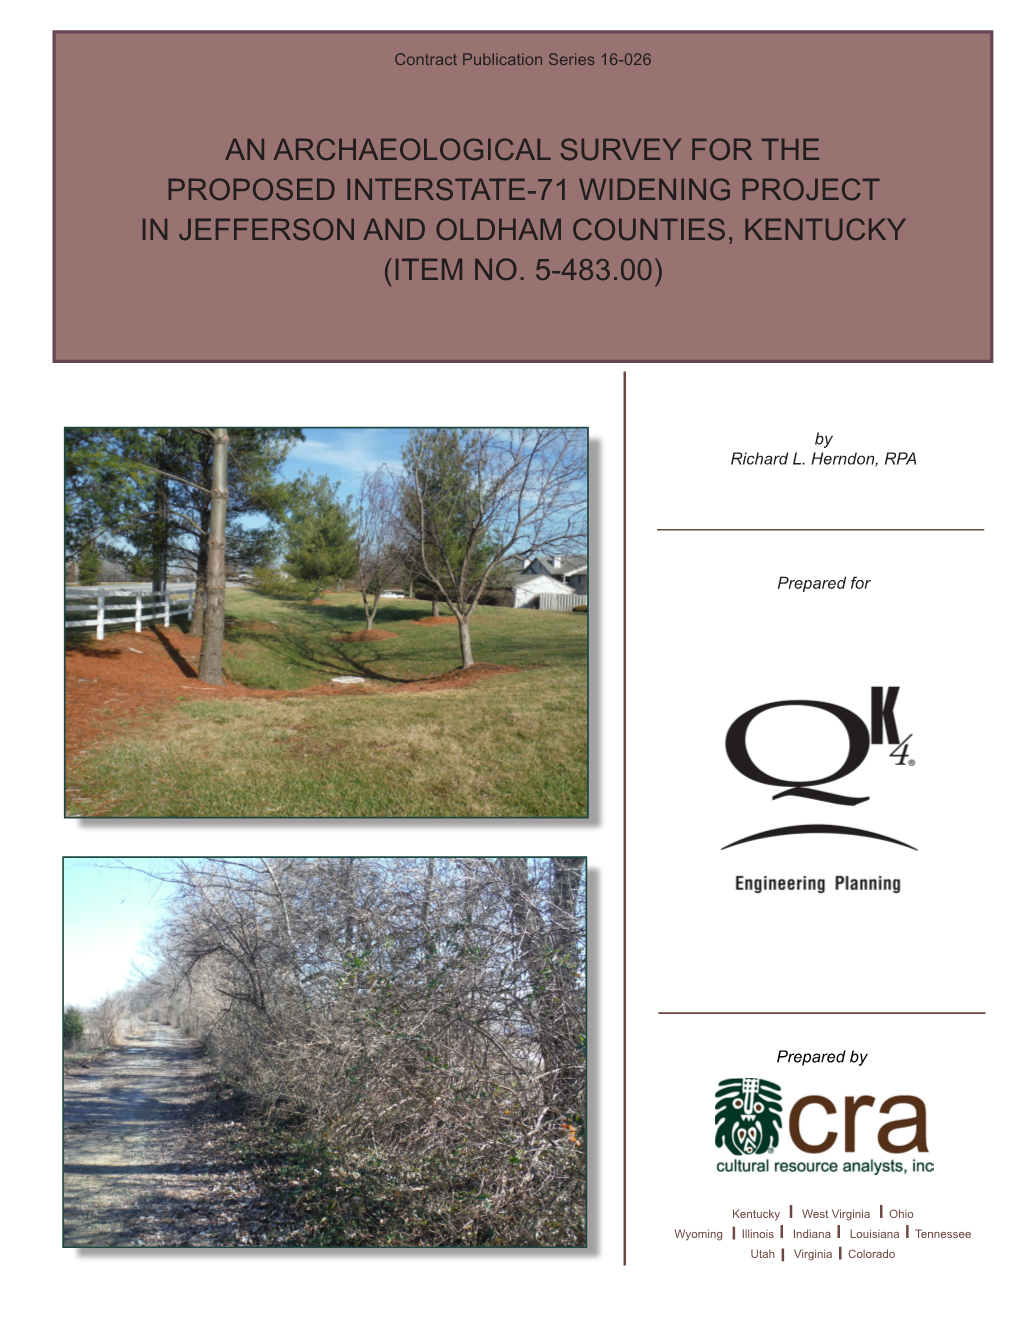 An Archaeological Survey for the Proposed Interstate-71 Widening Project in Jefferson and Oldham Counties, Kentucky (Item No